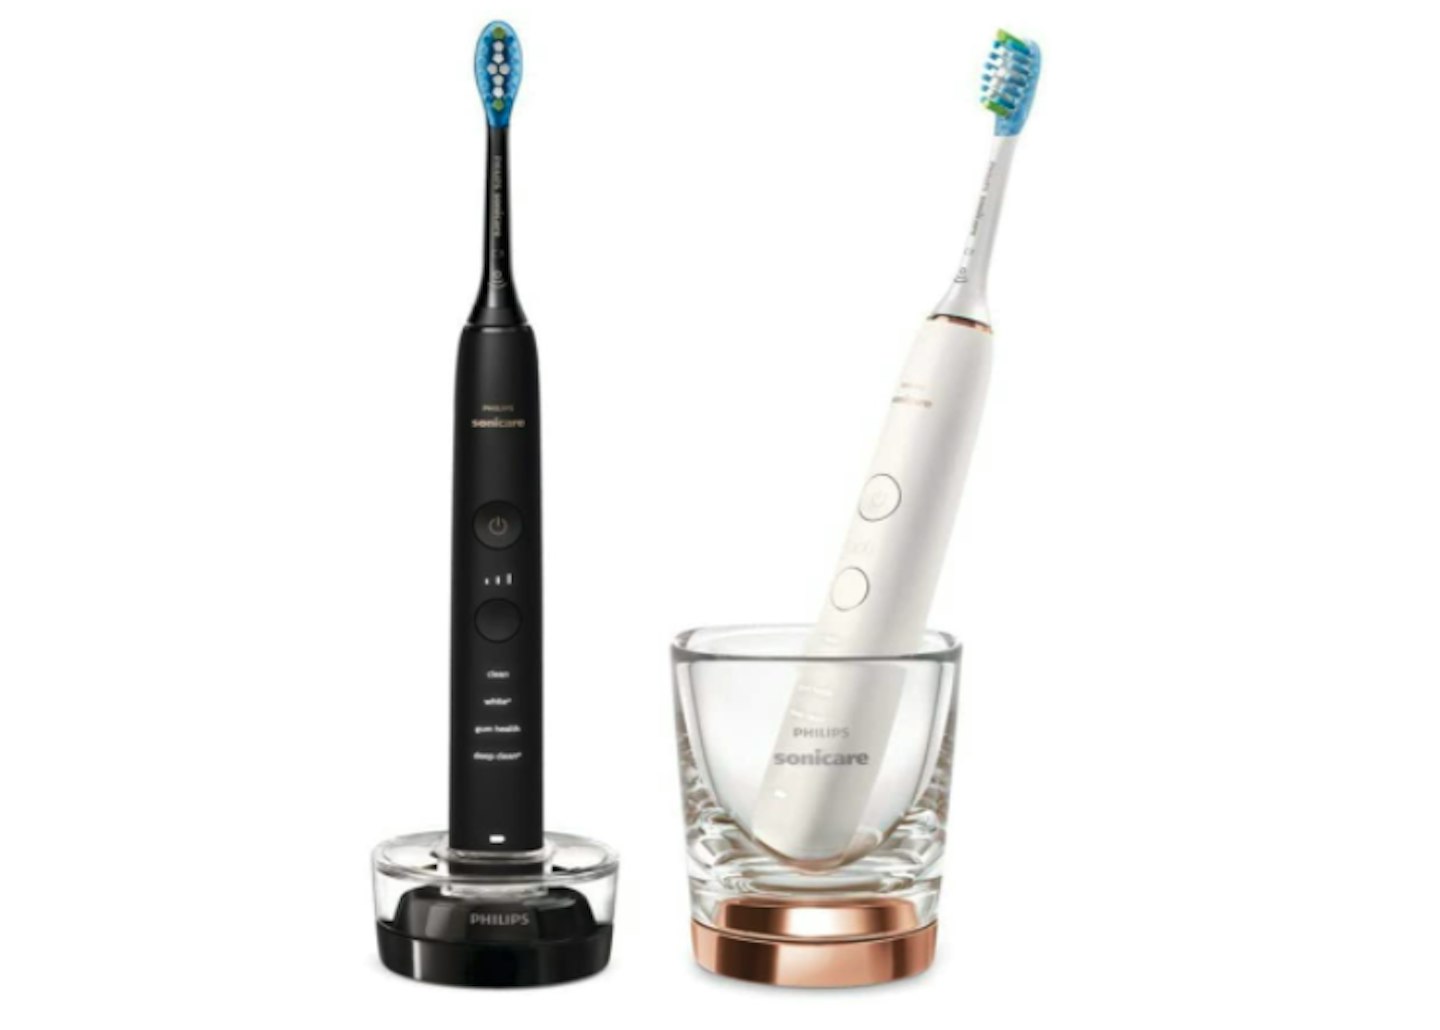 Philips Sonicare DiamondClean 9000 Set of 2 Electric Toothbrushes: Rose Gold & Black